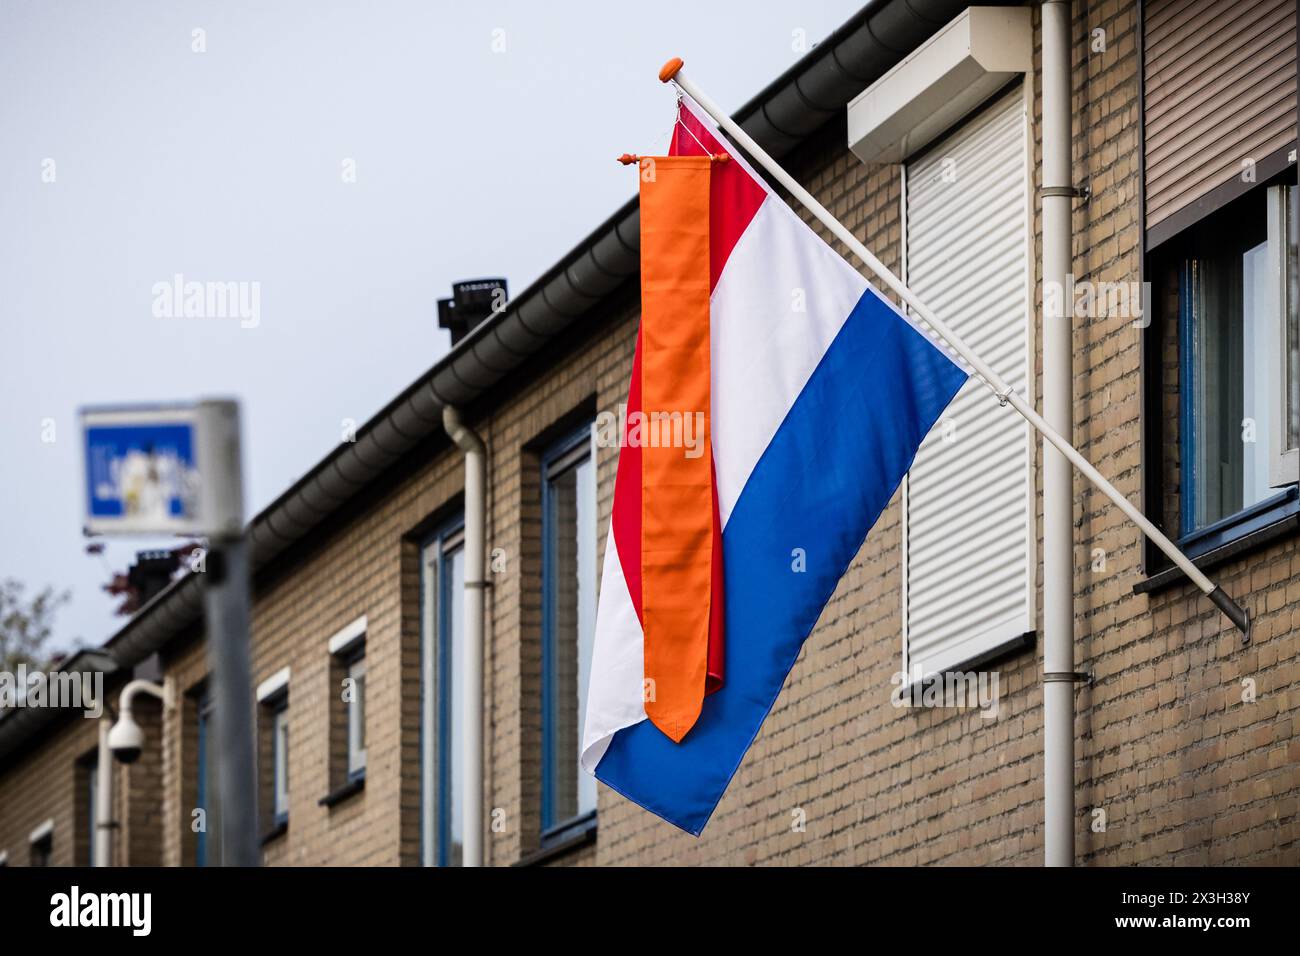 MIERLO - The Dutch flag with an orange pennant is flying for King's Day. While the royal family visits Emmen, the national holiday is also being fully celebrated in the rest of the country. ANP ROB ENGELAAR netherlands out - belgium out Stock Photo